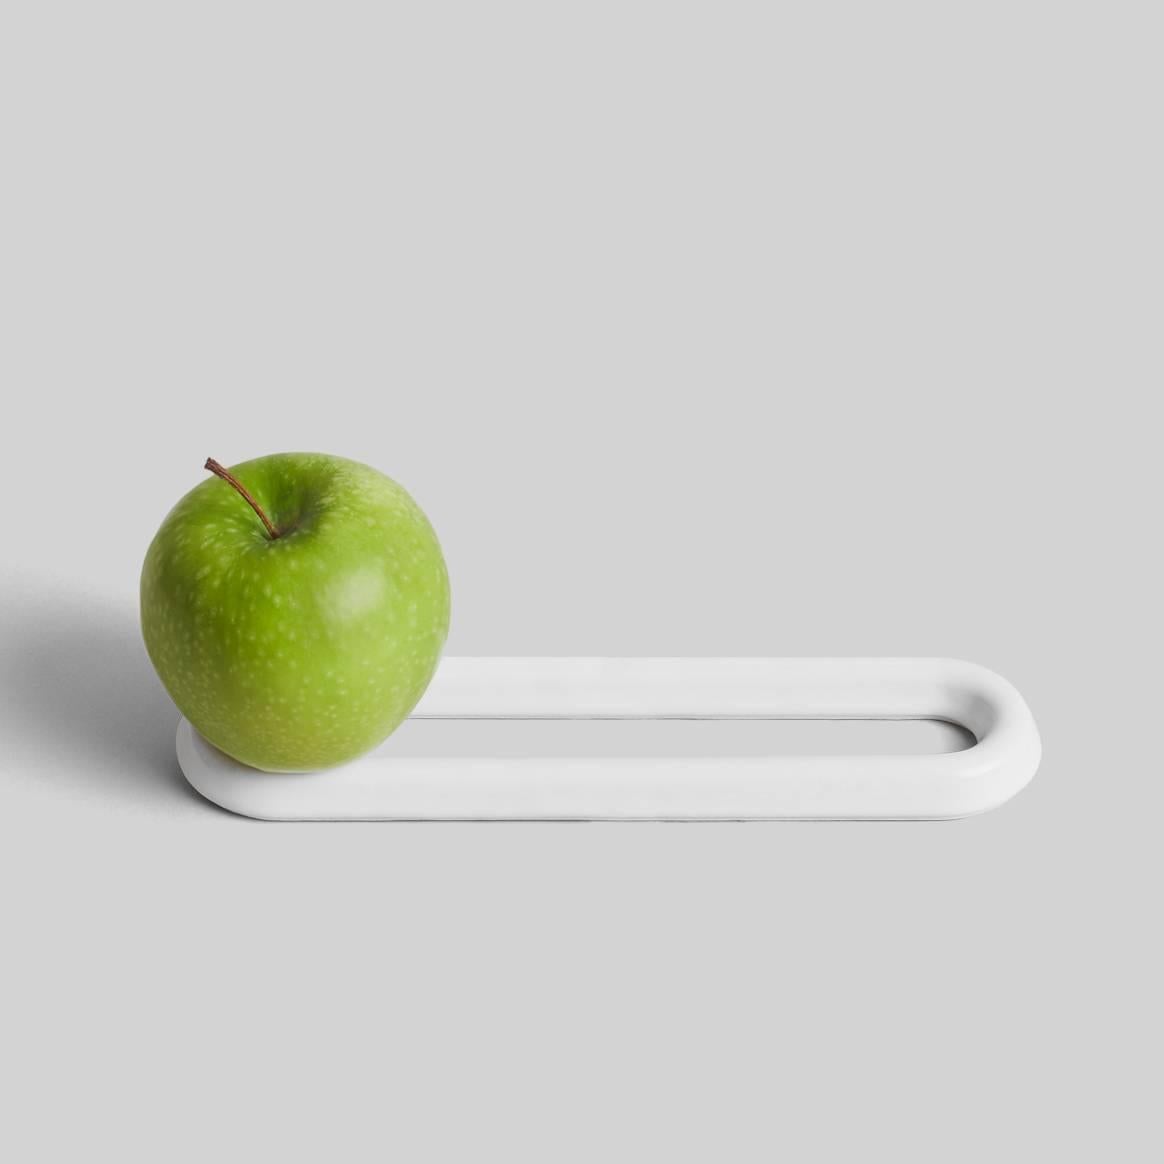 Loup began with a fresh look at an everyday object: the fruit bowl. Its abstract shape expresses its function only when occupied; otherwise, its purpose is left to the user’s imagination. Whether on the mantle or in use, this pared-down kitchen tool